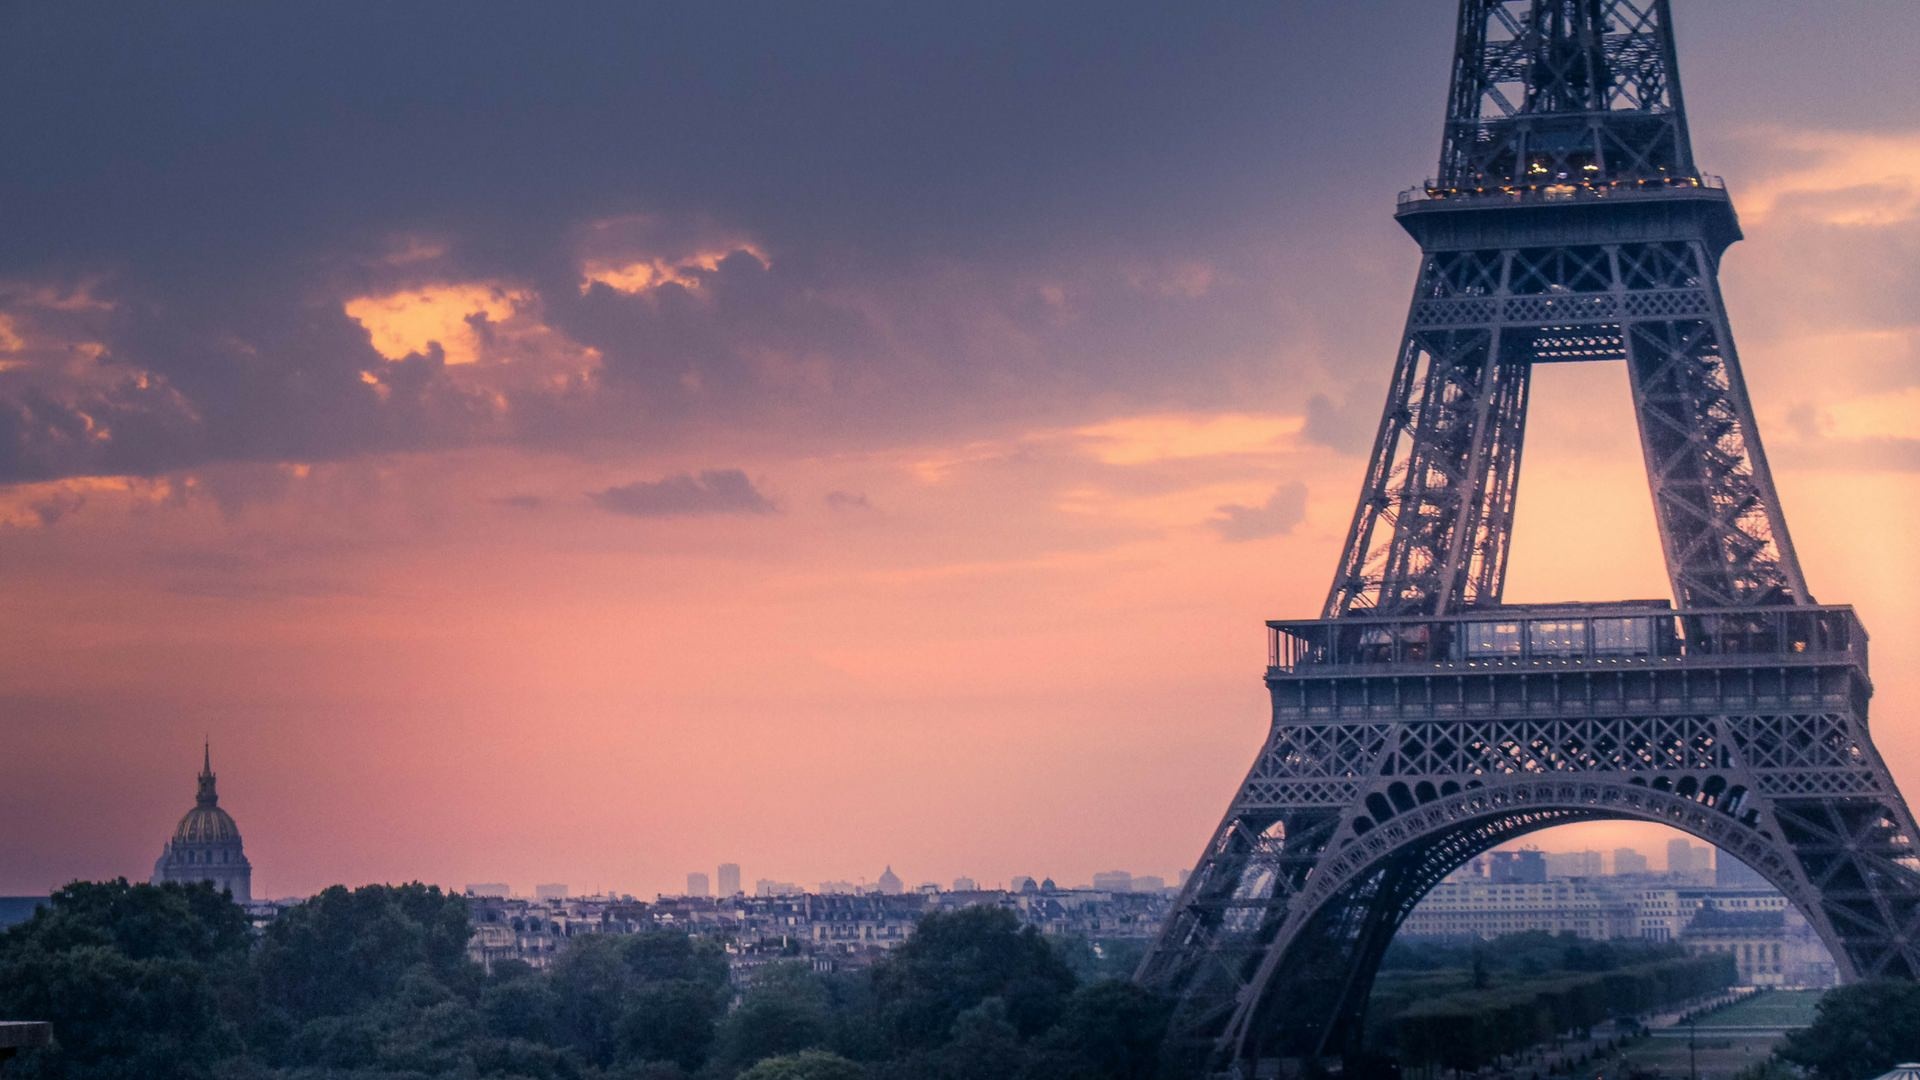 Paris: Called the City of Love, Sunset, Tourist attraction. 1920x1080 Full HD Wallpaper.